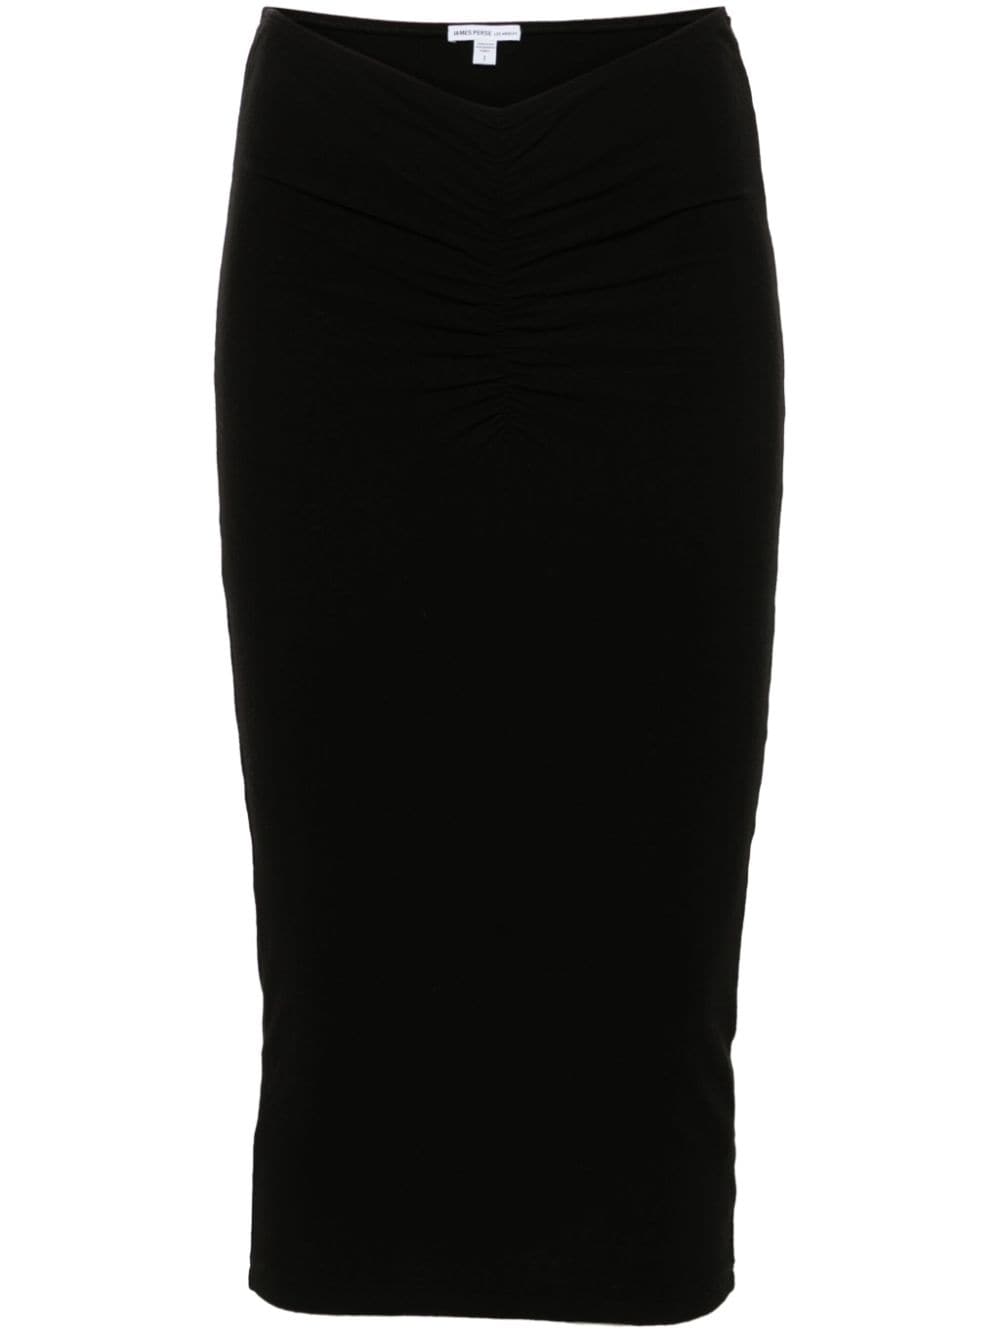 ruched jersey midi skirt